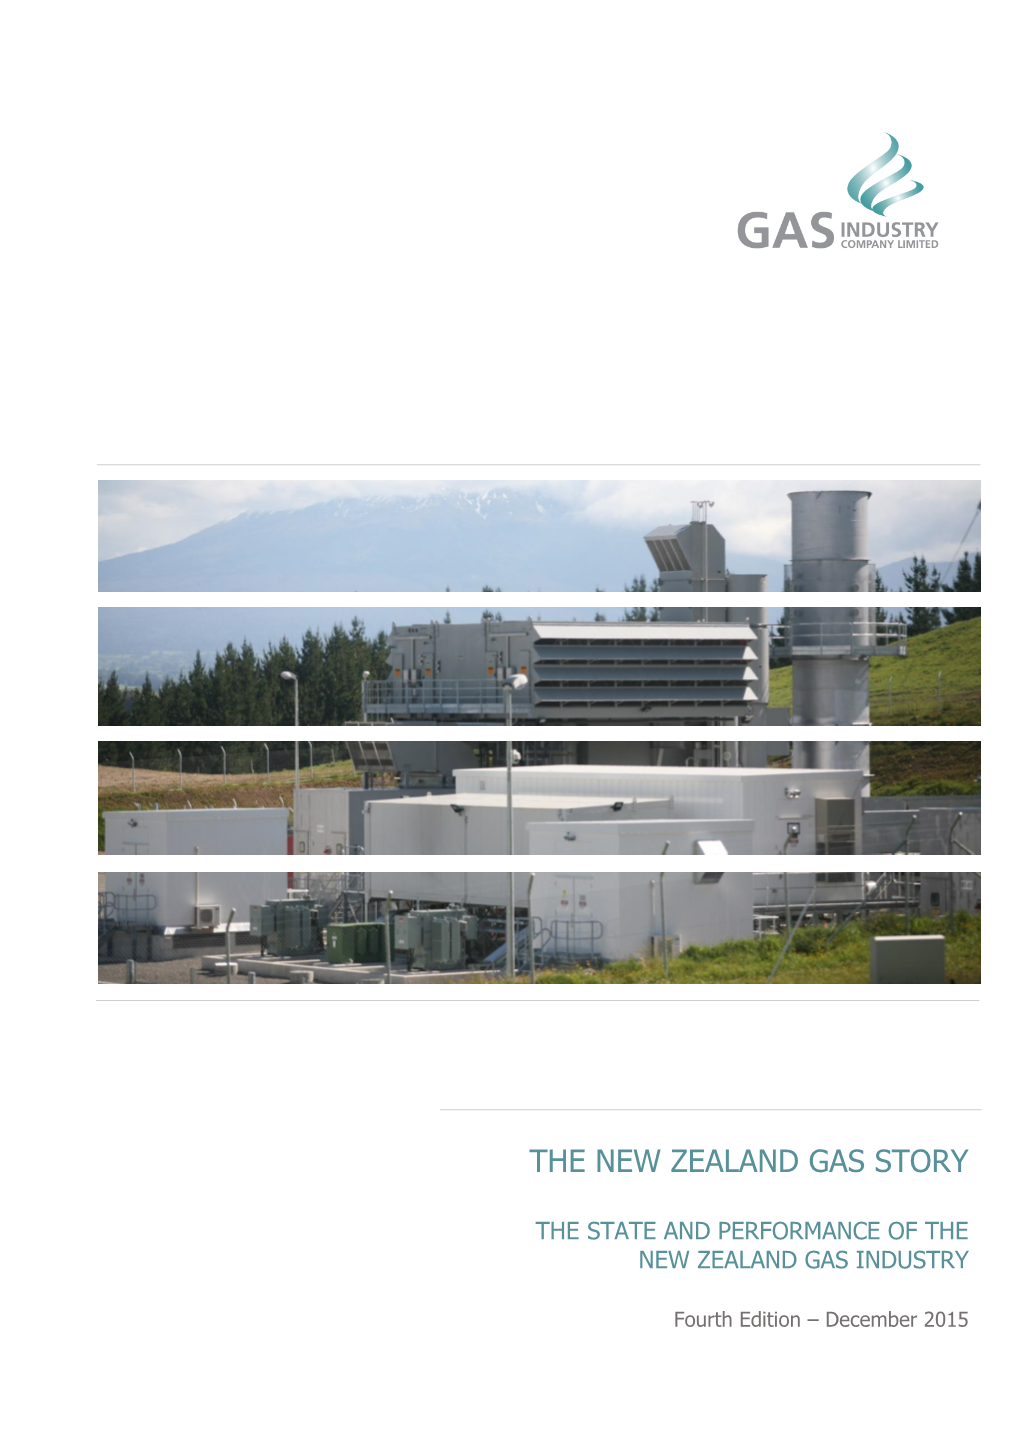 The New Zealand Gas Story